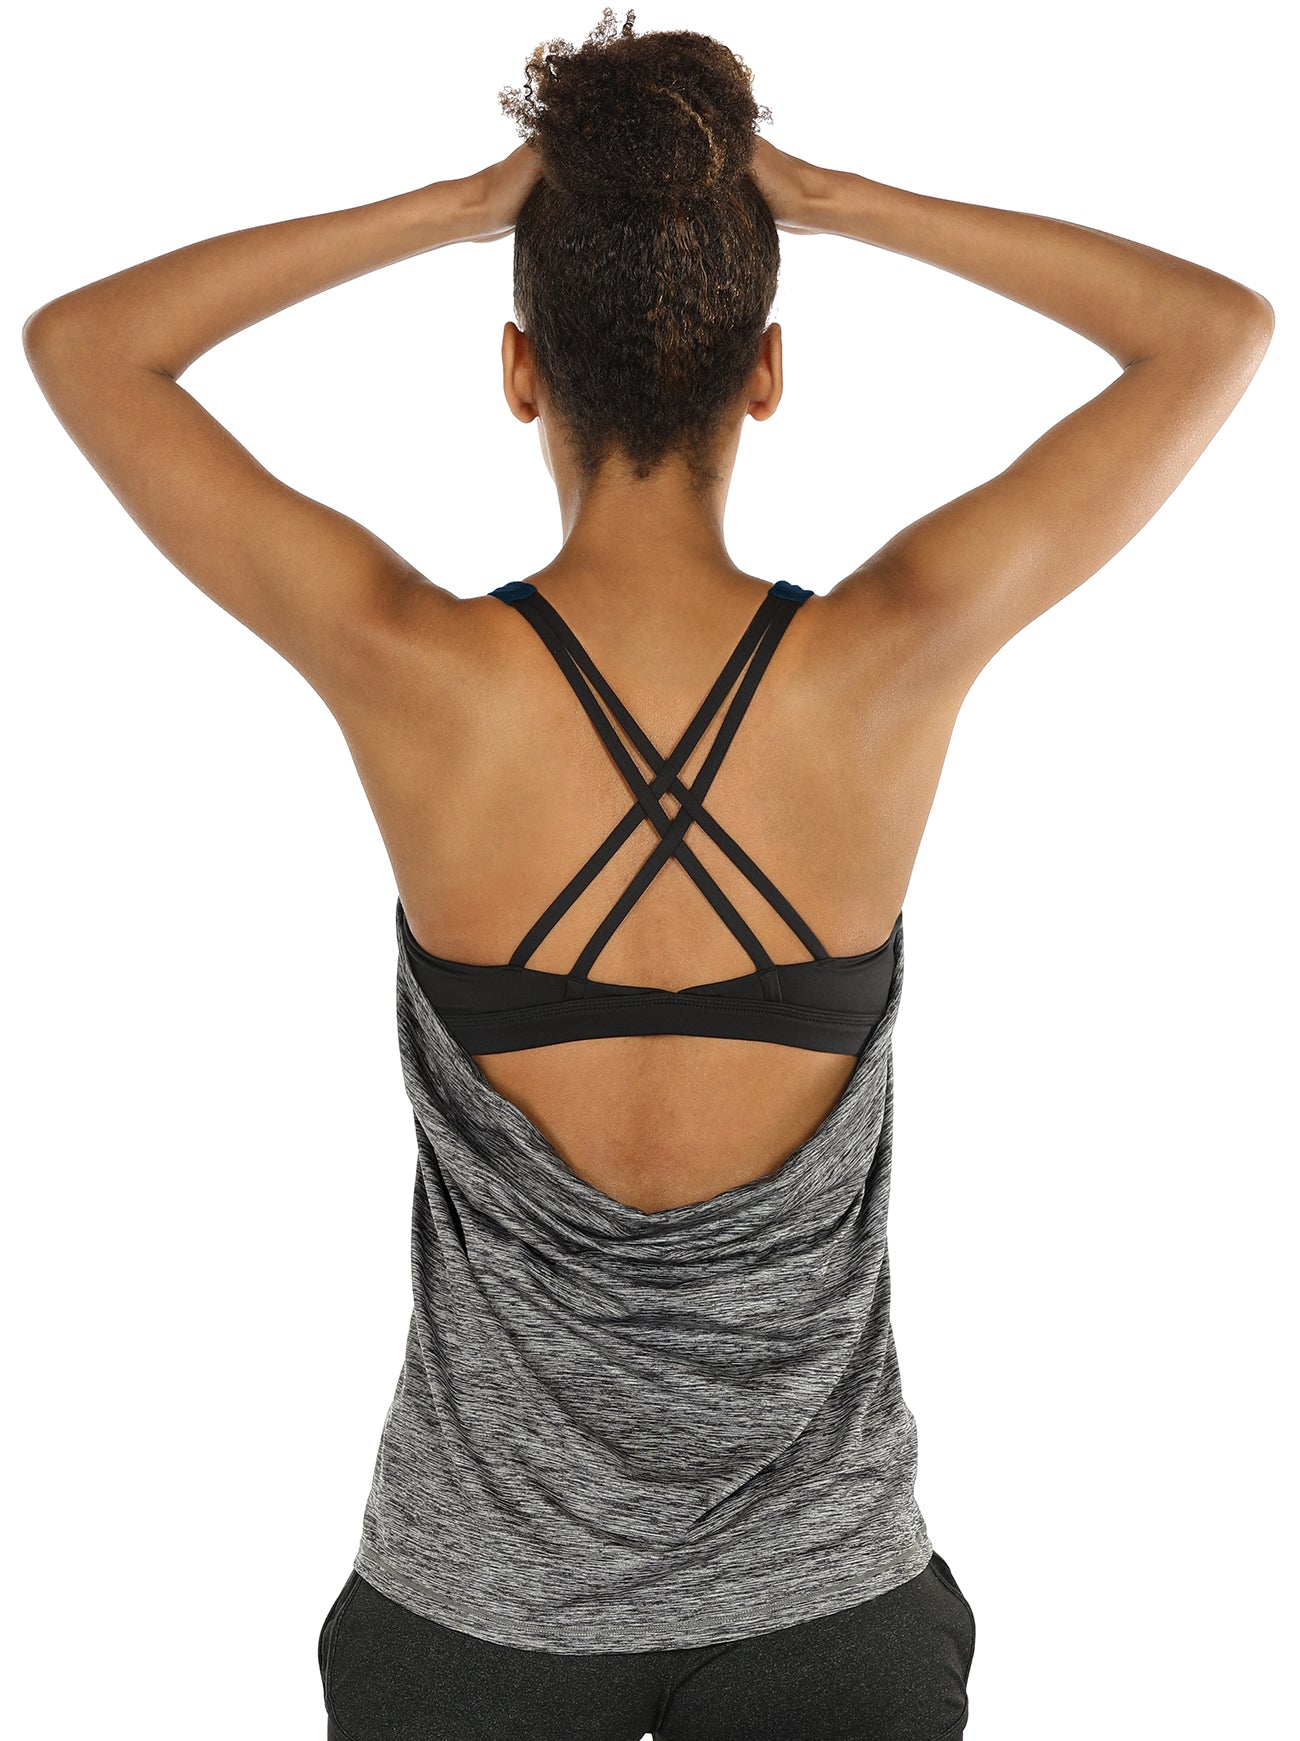 TK1A icyzone Workout Tank Tops Built in Bra - Women's Strappy Athletic –  icyzonesports